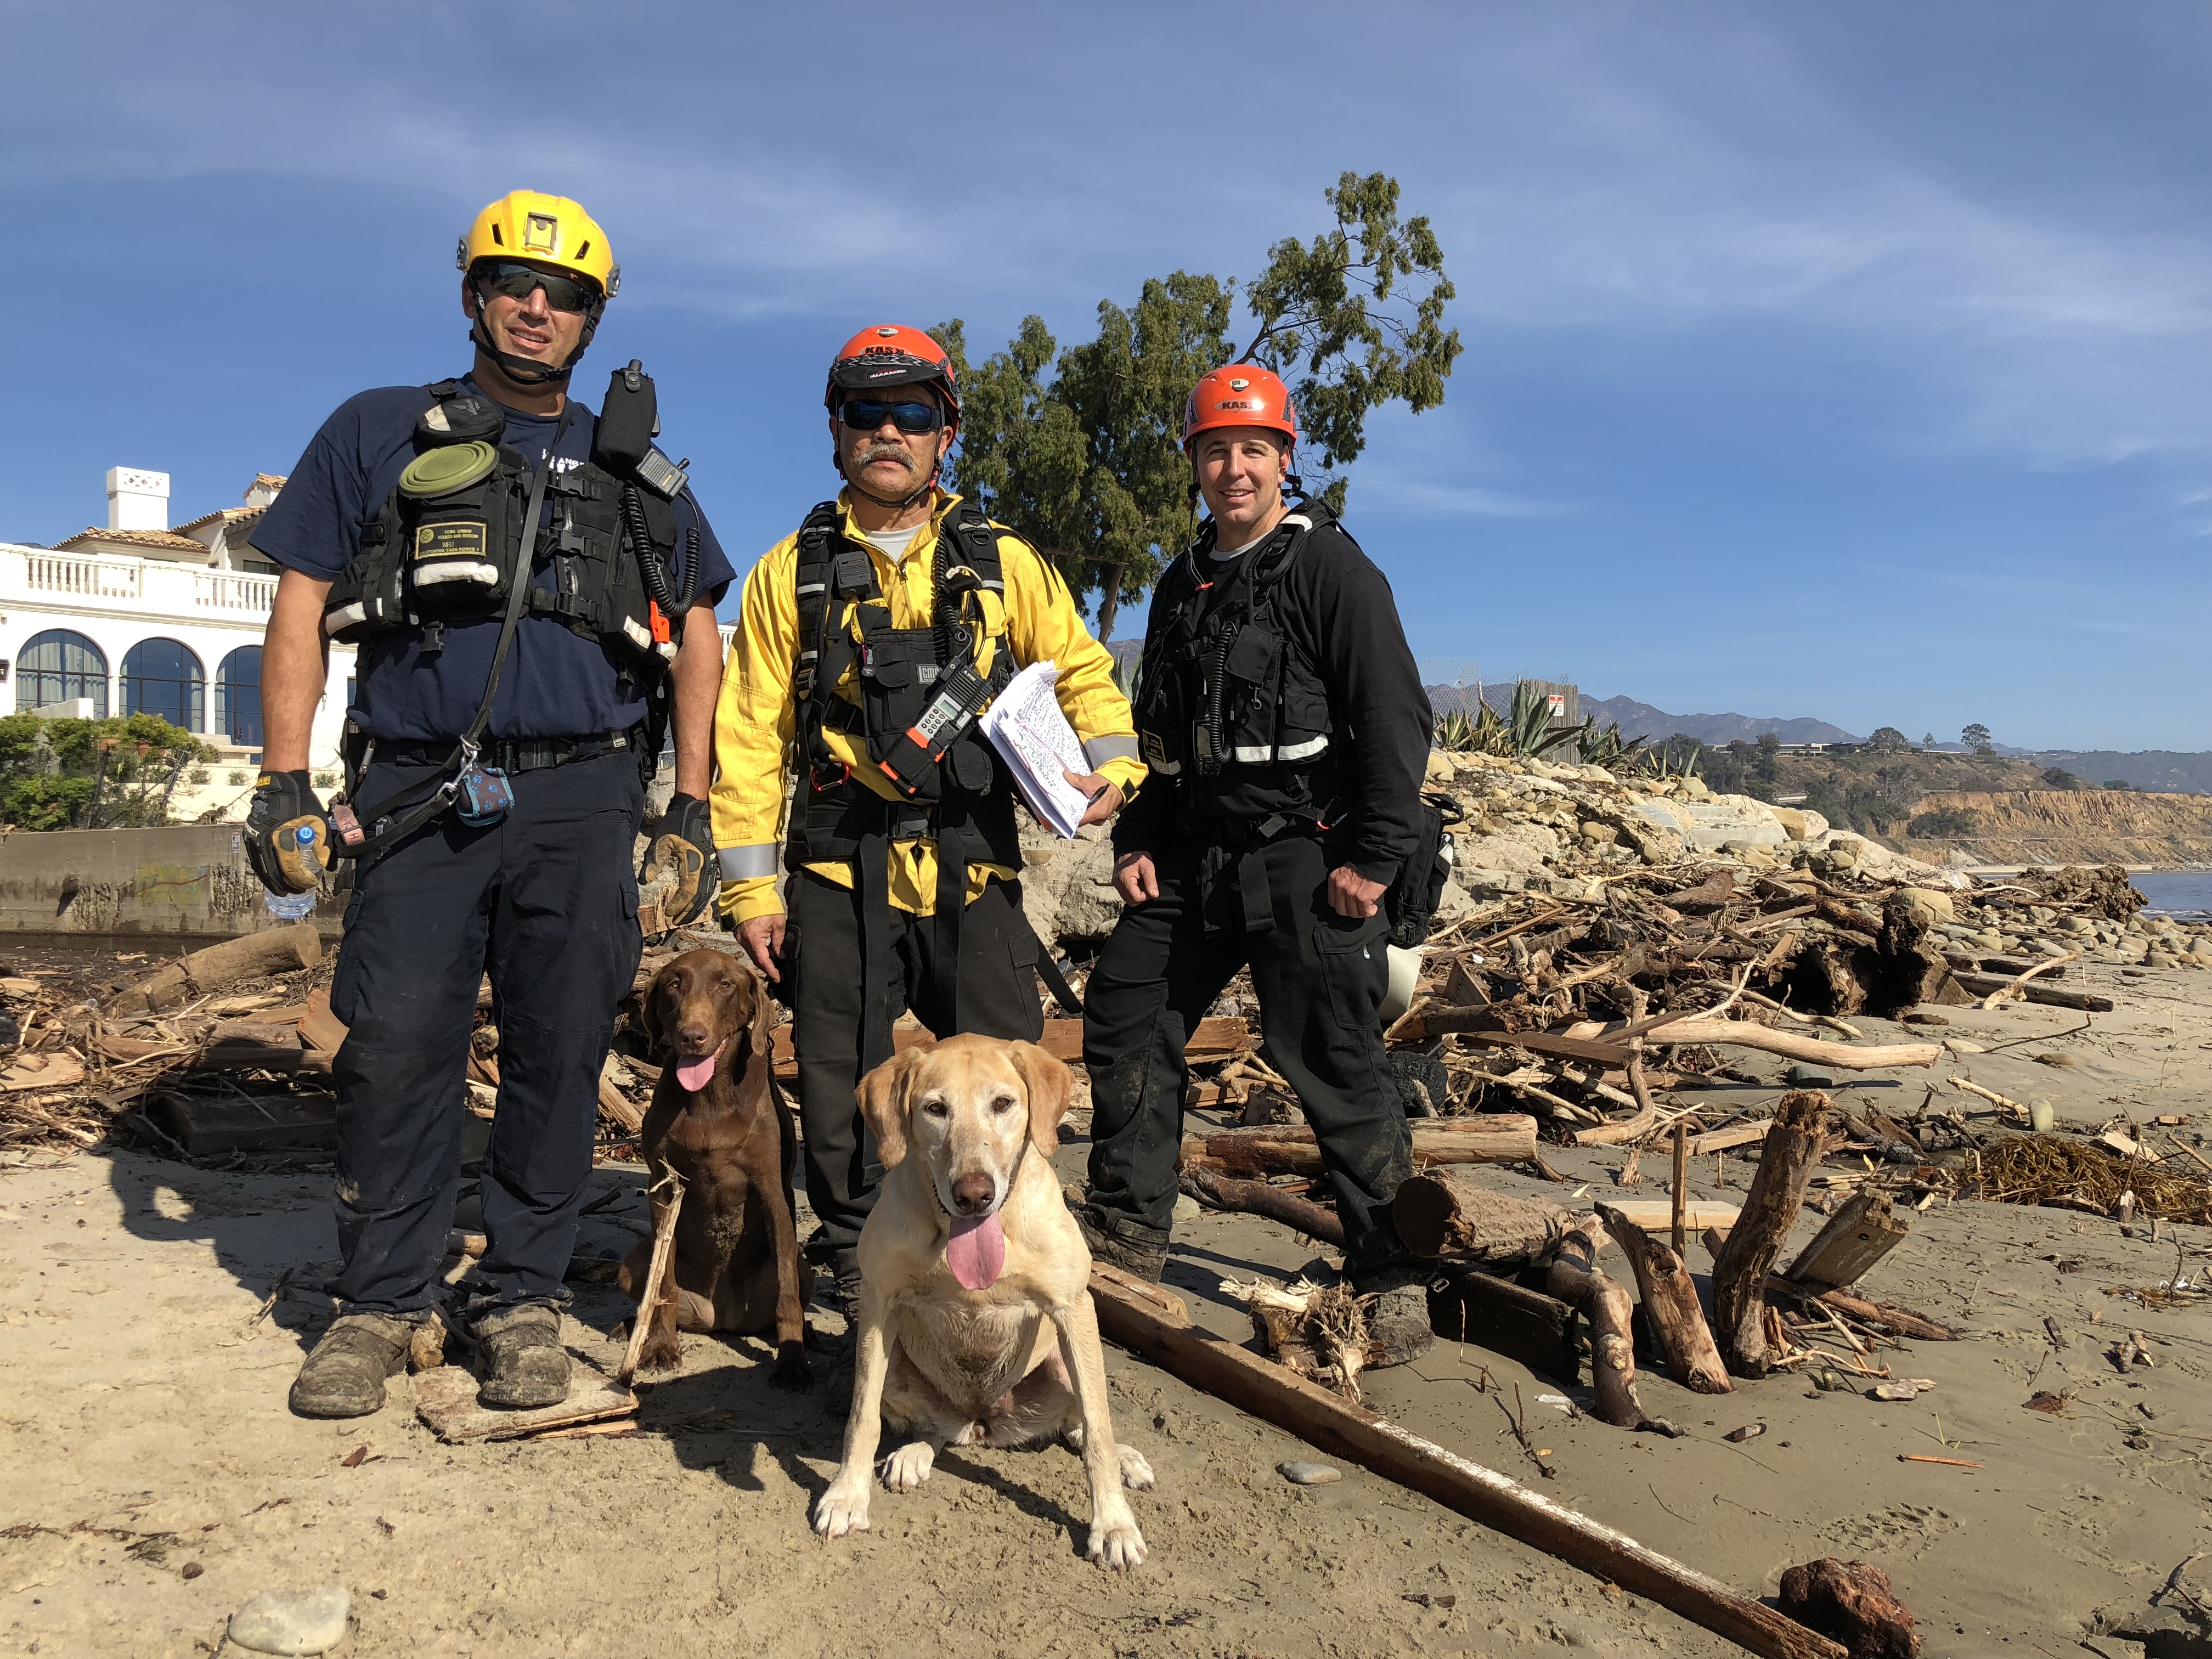 Subject with two others and search dogs on beach with mudslide debris